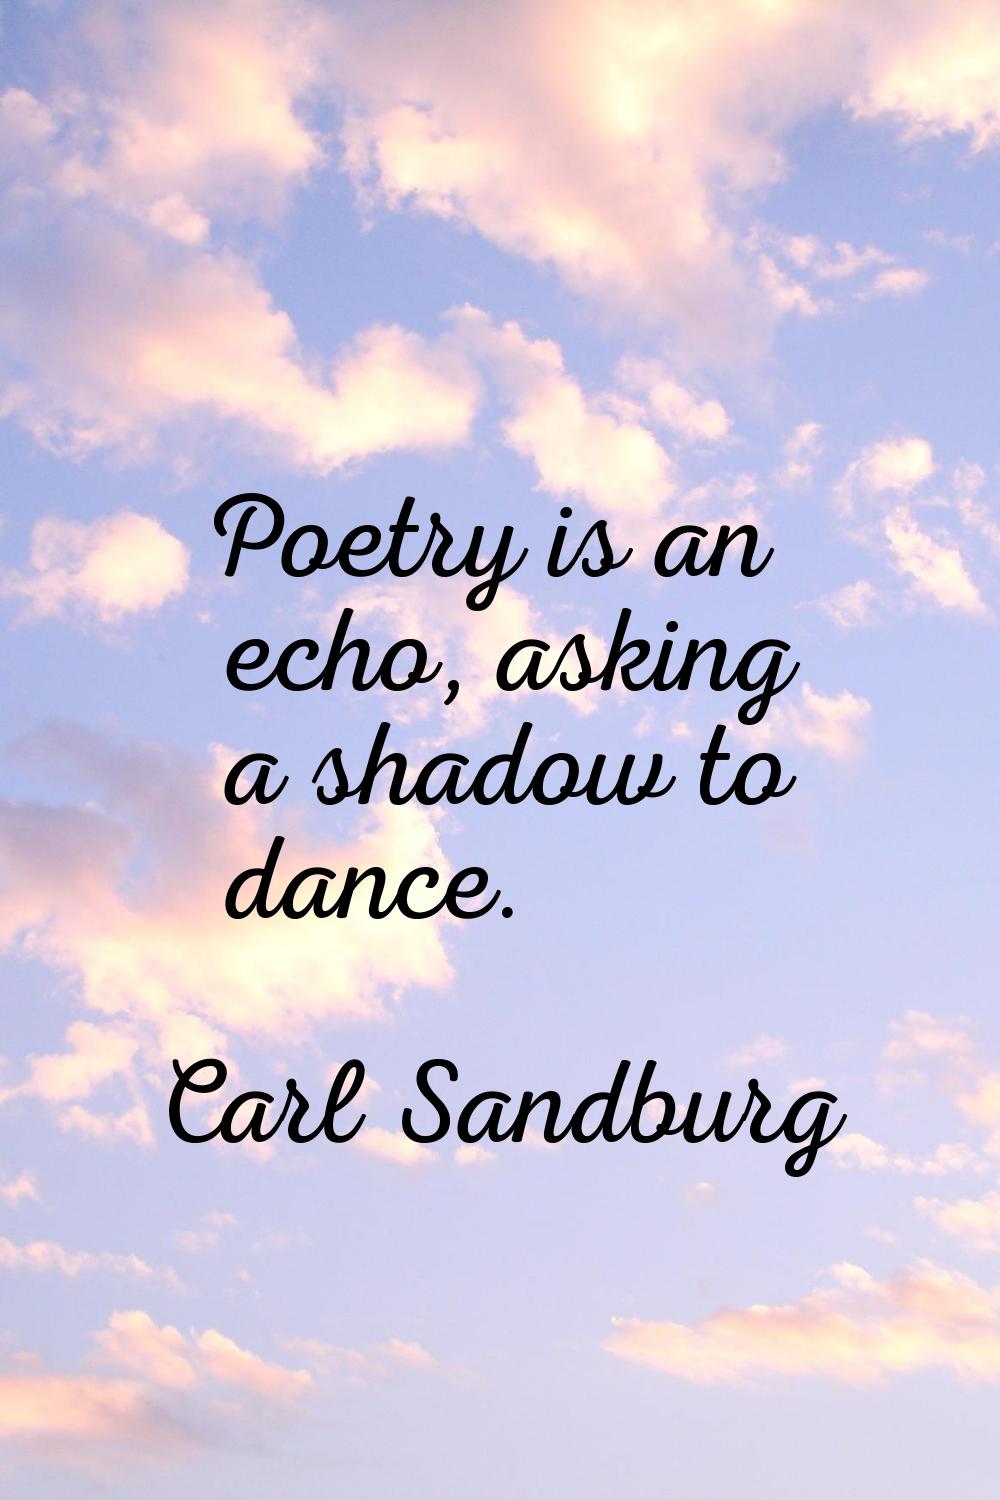 Poetry is an echo, asking a shadow to dance.